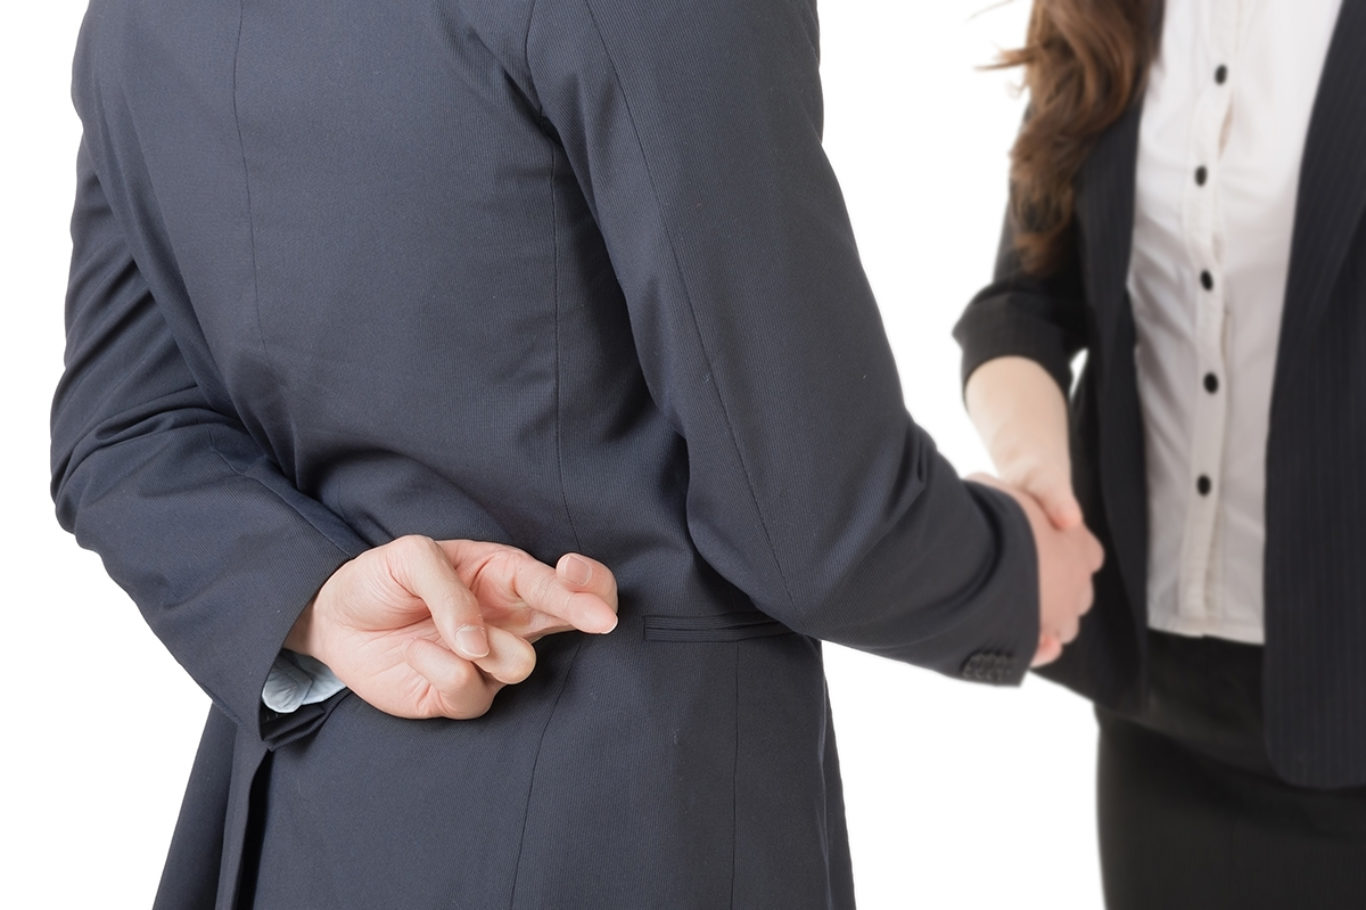 Business woman and man shake hands and put finger cross on back, closeup portrait isolated on white background.